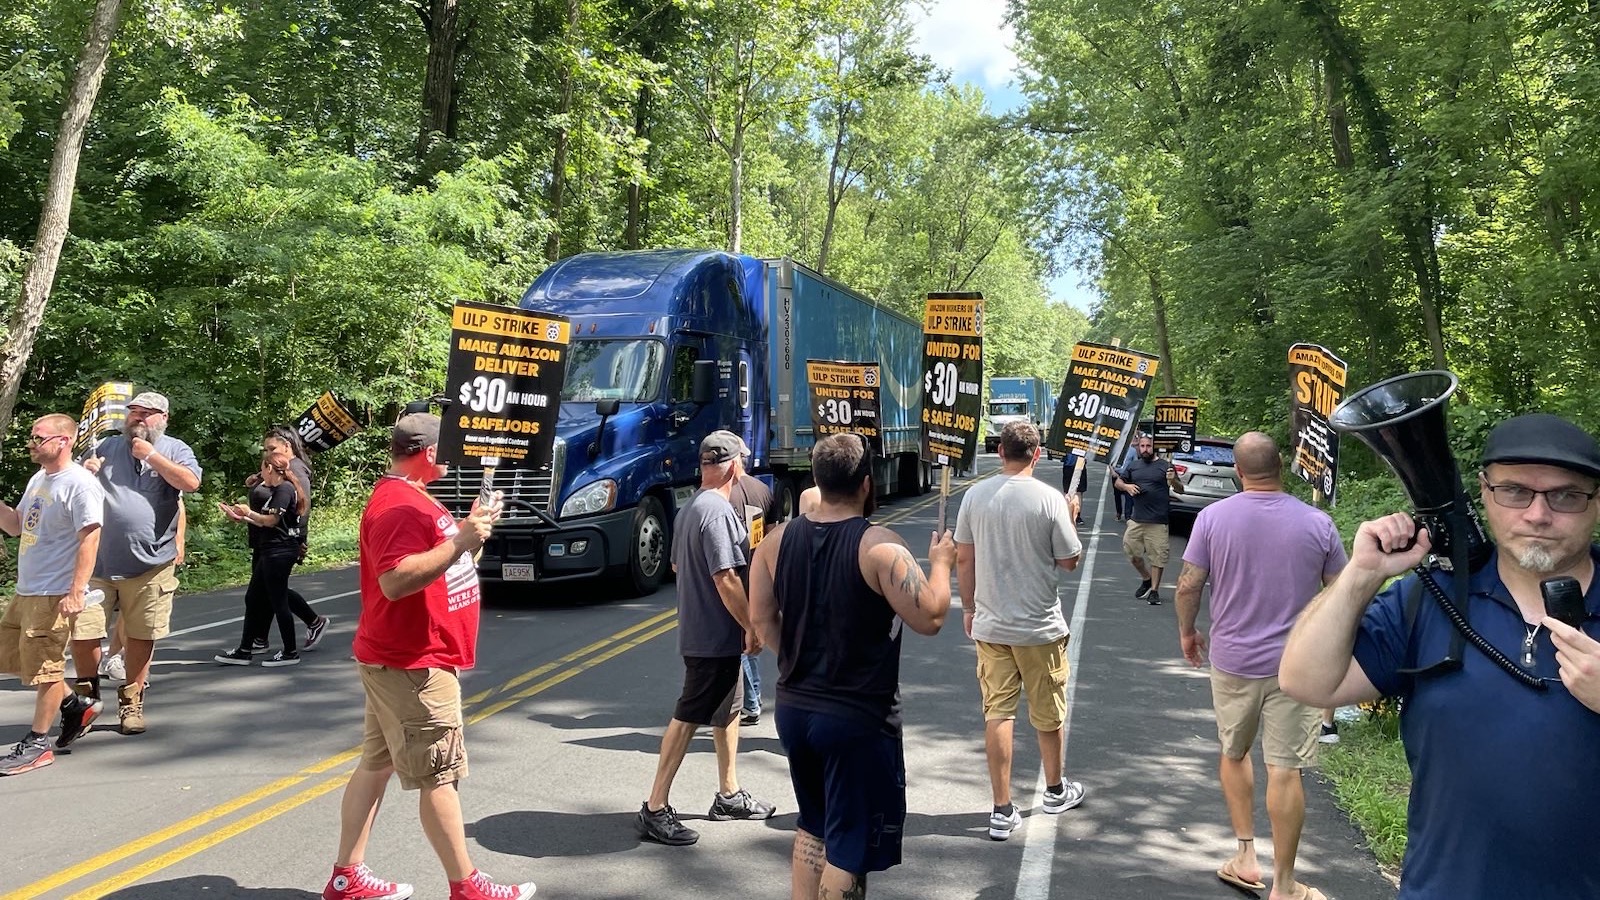 crowd of drivers marching on a road lined with trees in connecticut, holding signs saying make amazon deliver $30 an hour and safe jobs and halting amazon branded semi trucks